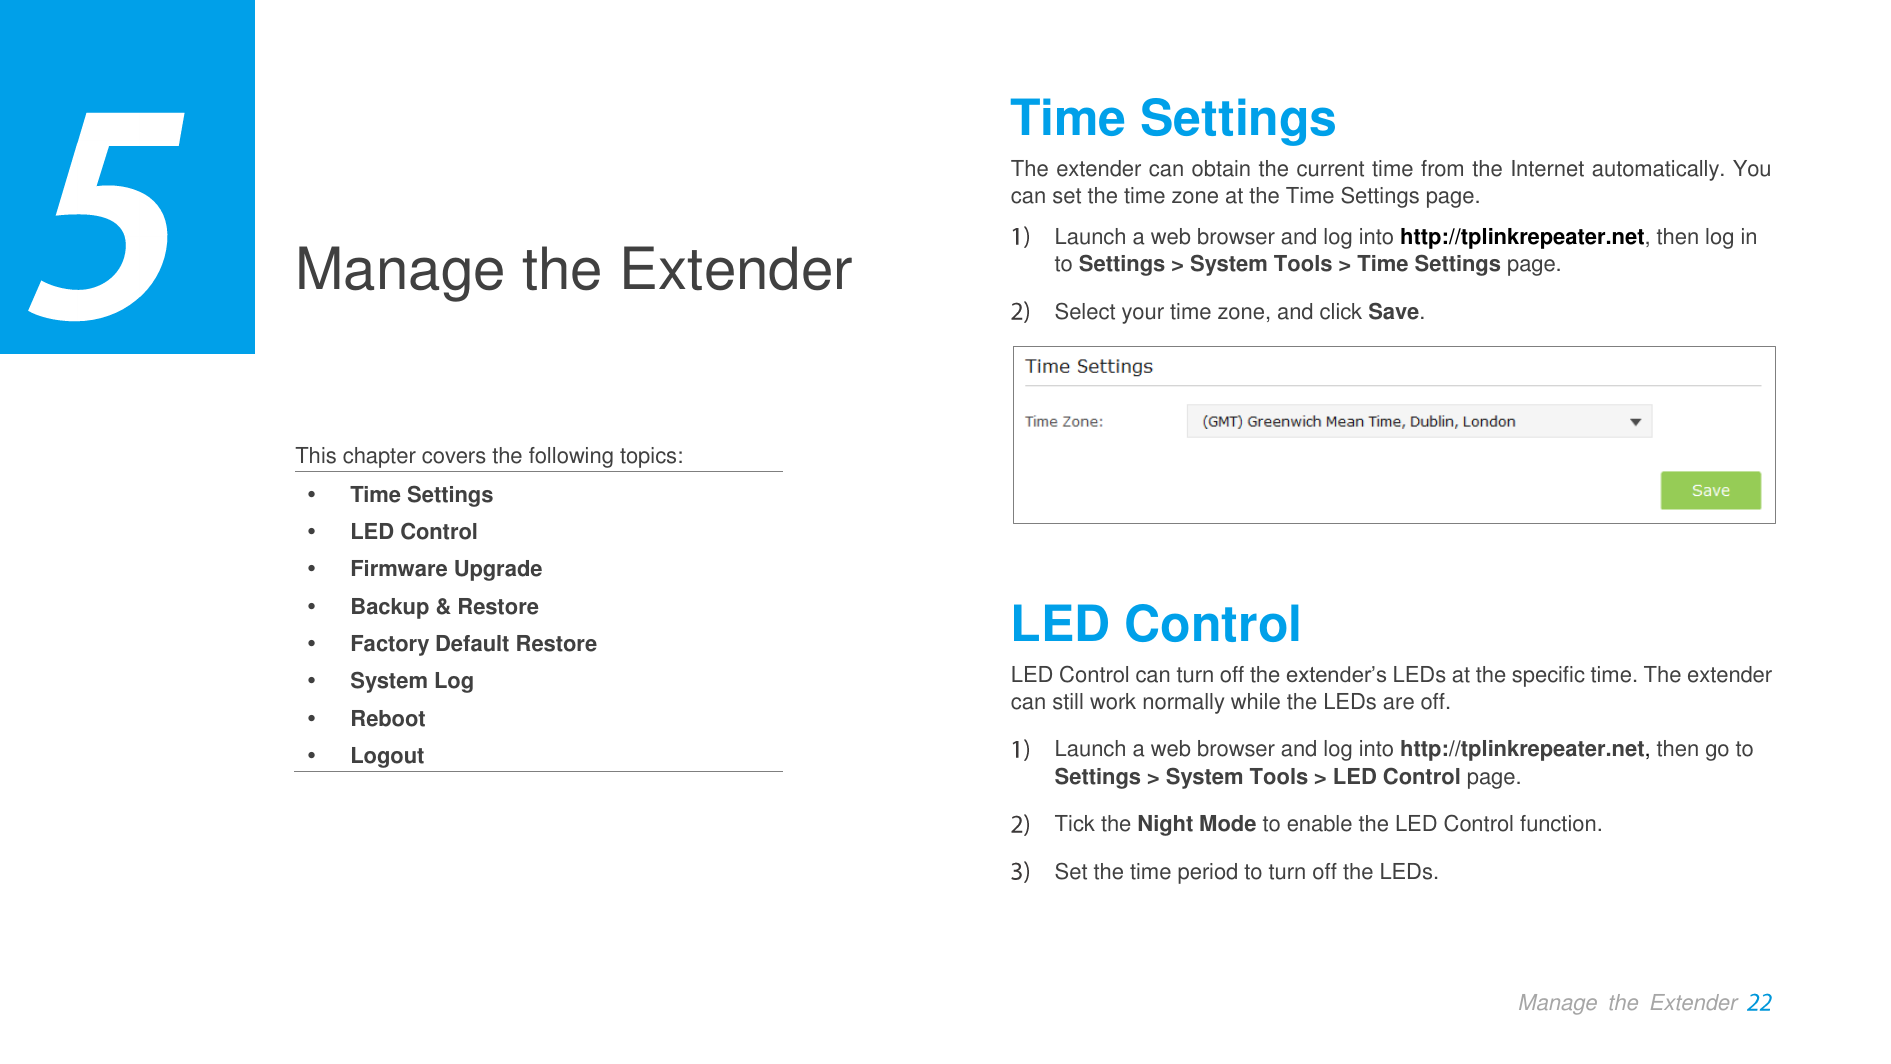  Manage  the  Extender  Manage the Extender    This chapter covers the following topics:  Time Settings  LED Control  Firmware Upgrade  Backup &amp; Restore  Factory Default Restore  System Log  Reboot  Logout Time Settings The extender can obtain the current time from the Internet automatically. You can set the time zone at the Time Settings page.  Launch a web browser and log into http://tplinkrepeater.net, then log in to Settings &gt; System Tools &gt; Time Settings page.  Select your time zone, and click Save.  LED Control LED Control can turn off the extender’s LEDs at the specific time. The extender can still work normally while the LEDs are off.    Launch a web browser and log into http://tplinkrepeater.net, then go to Settings &gt; System Tools &gt; LED Control page.  Tick the Night Mode to enable the LED Control function.  Set the time period to turn off the LEDs. 3 